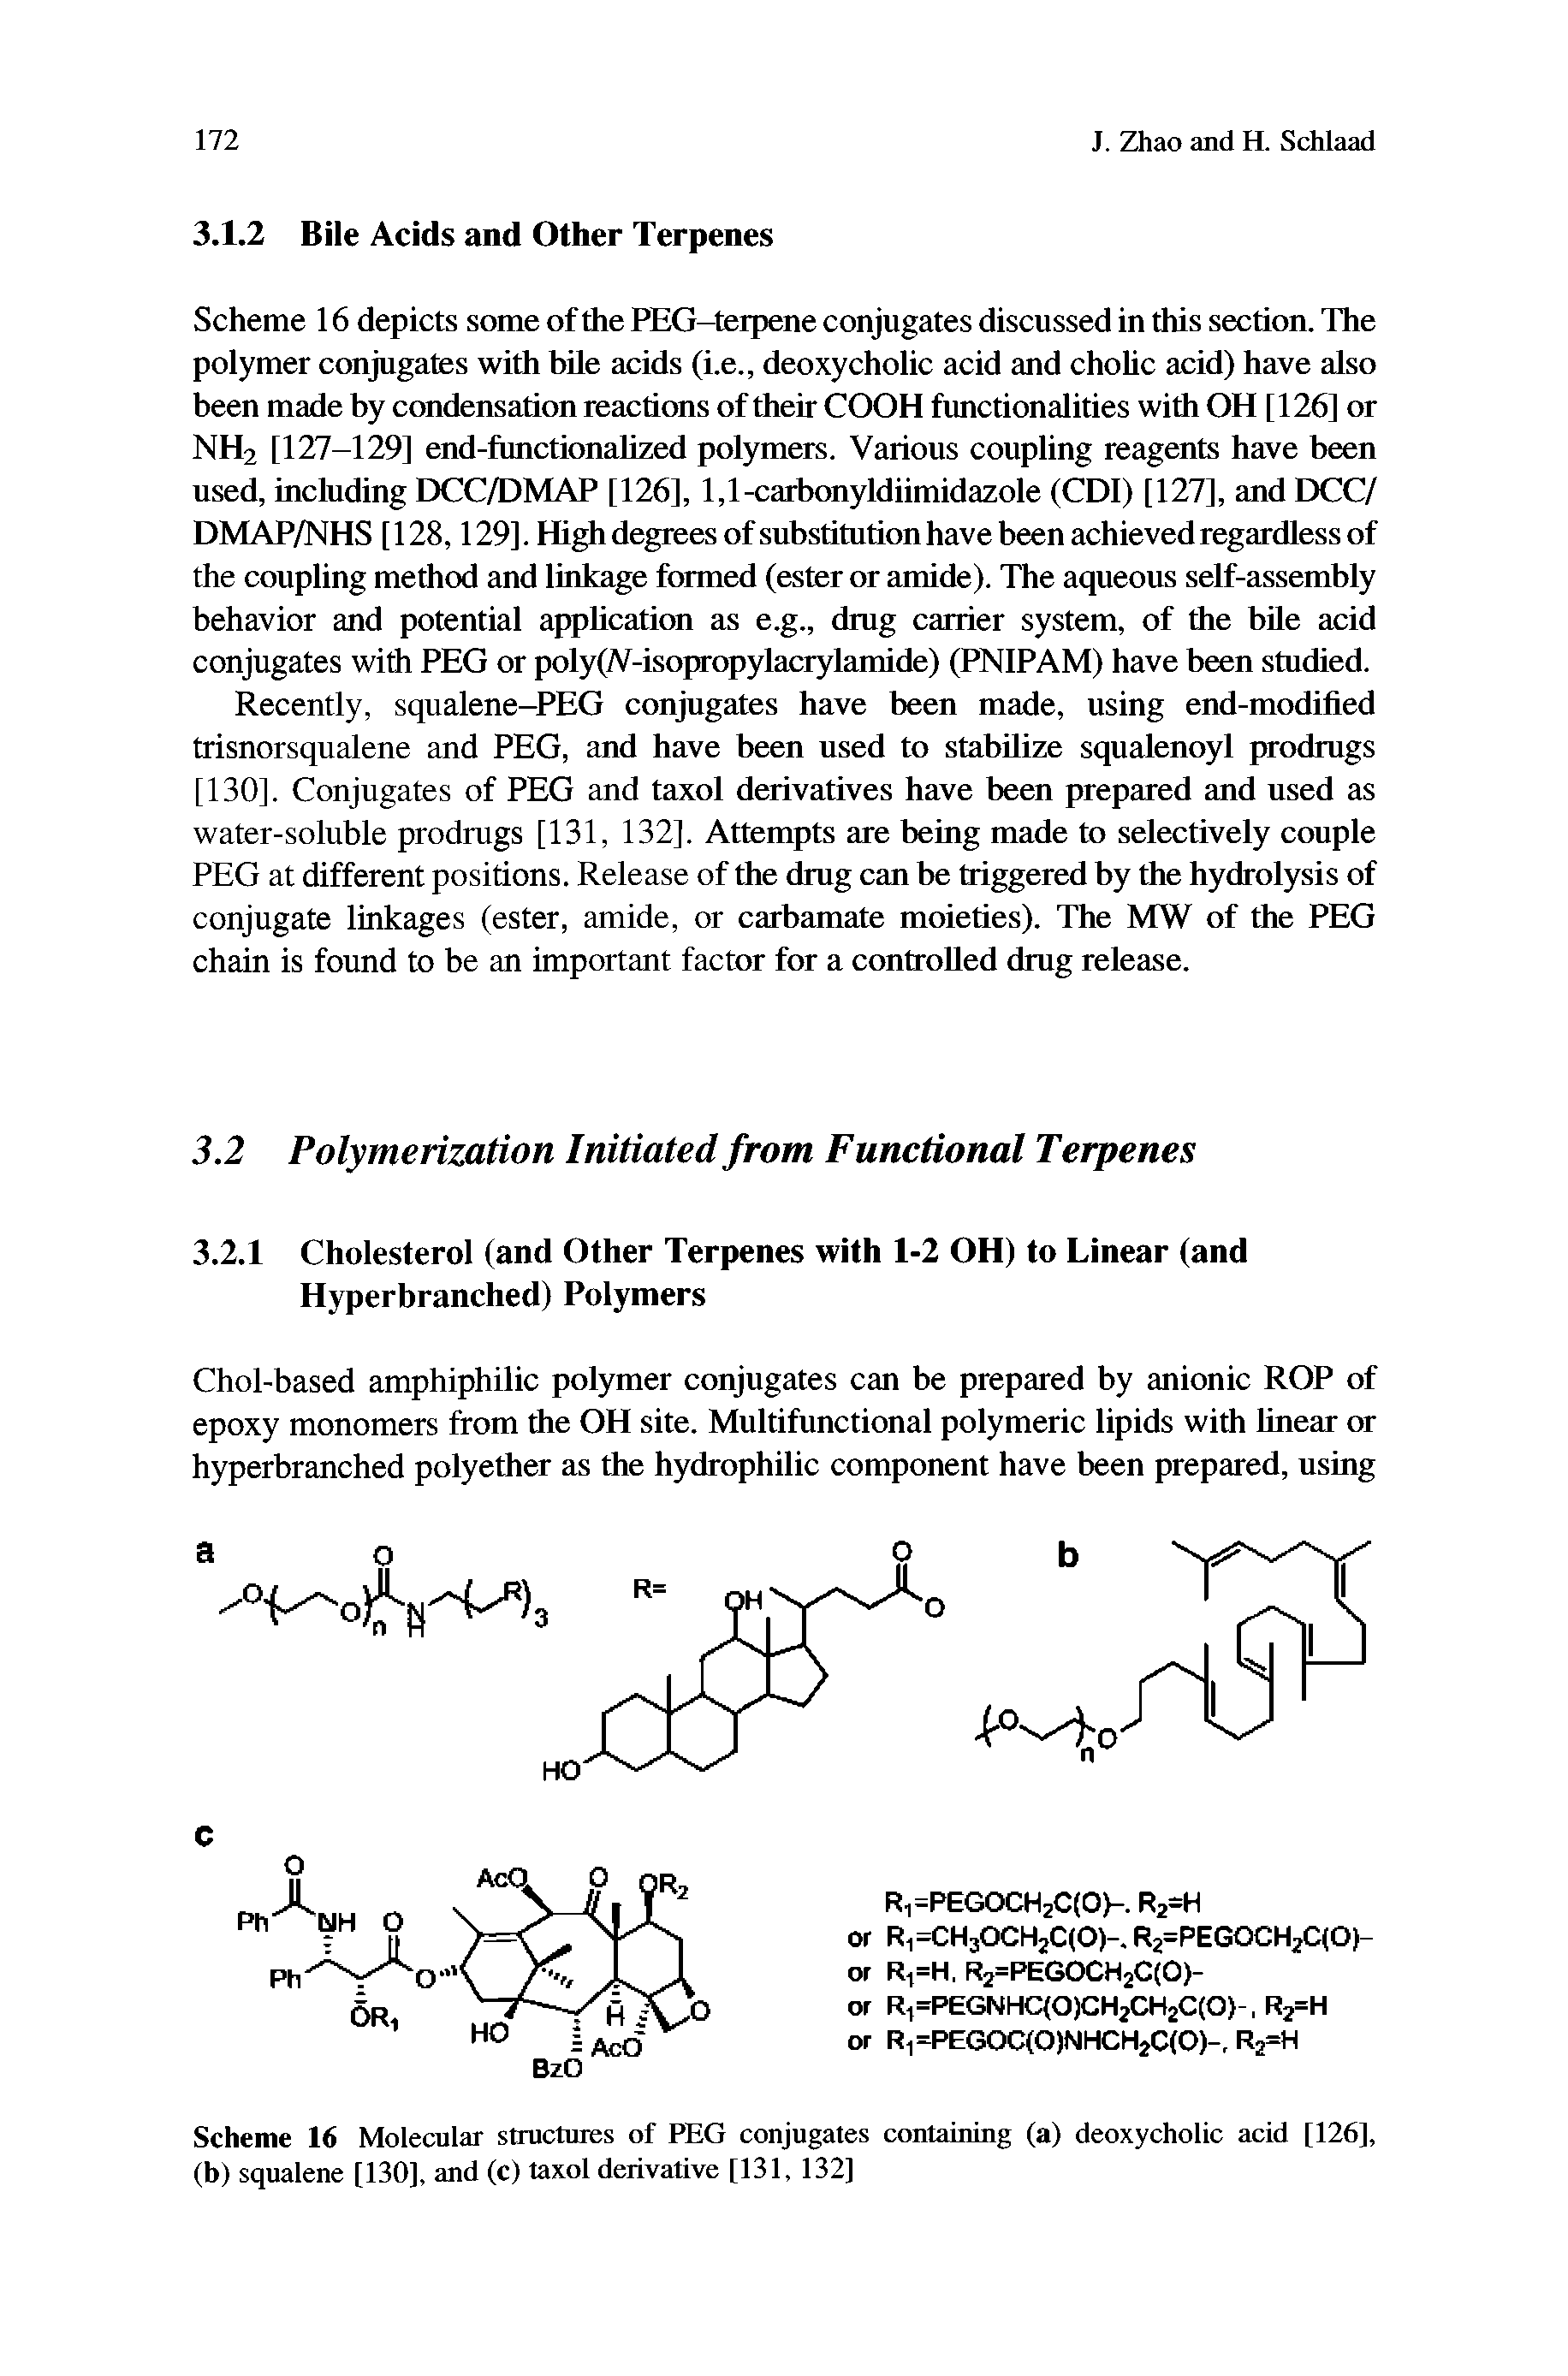 Scheme 16 Molecular structures of PEG conjugates containing (a) deoxycholic acid [126], (b) squalene [130], and (c) taxol derivative [131, 132]...